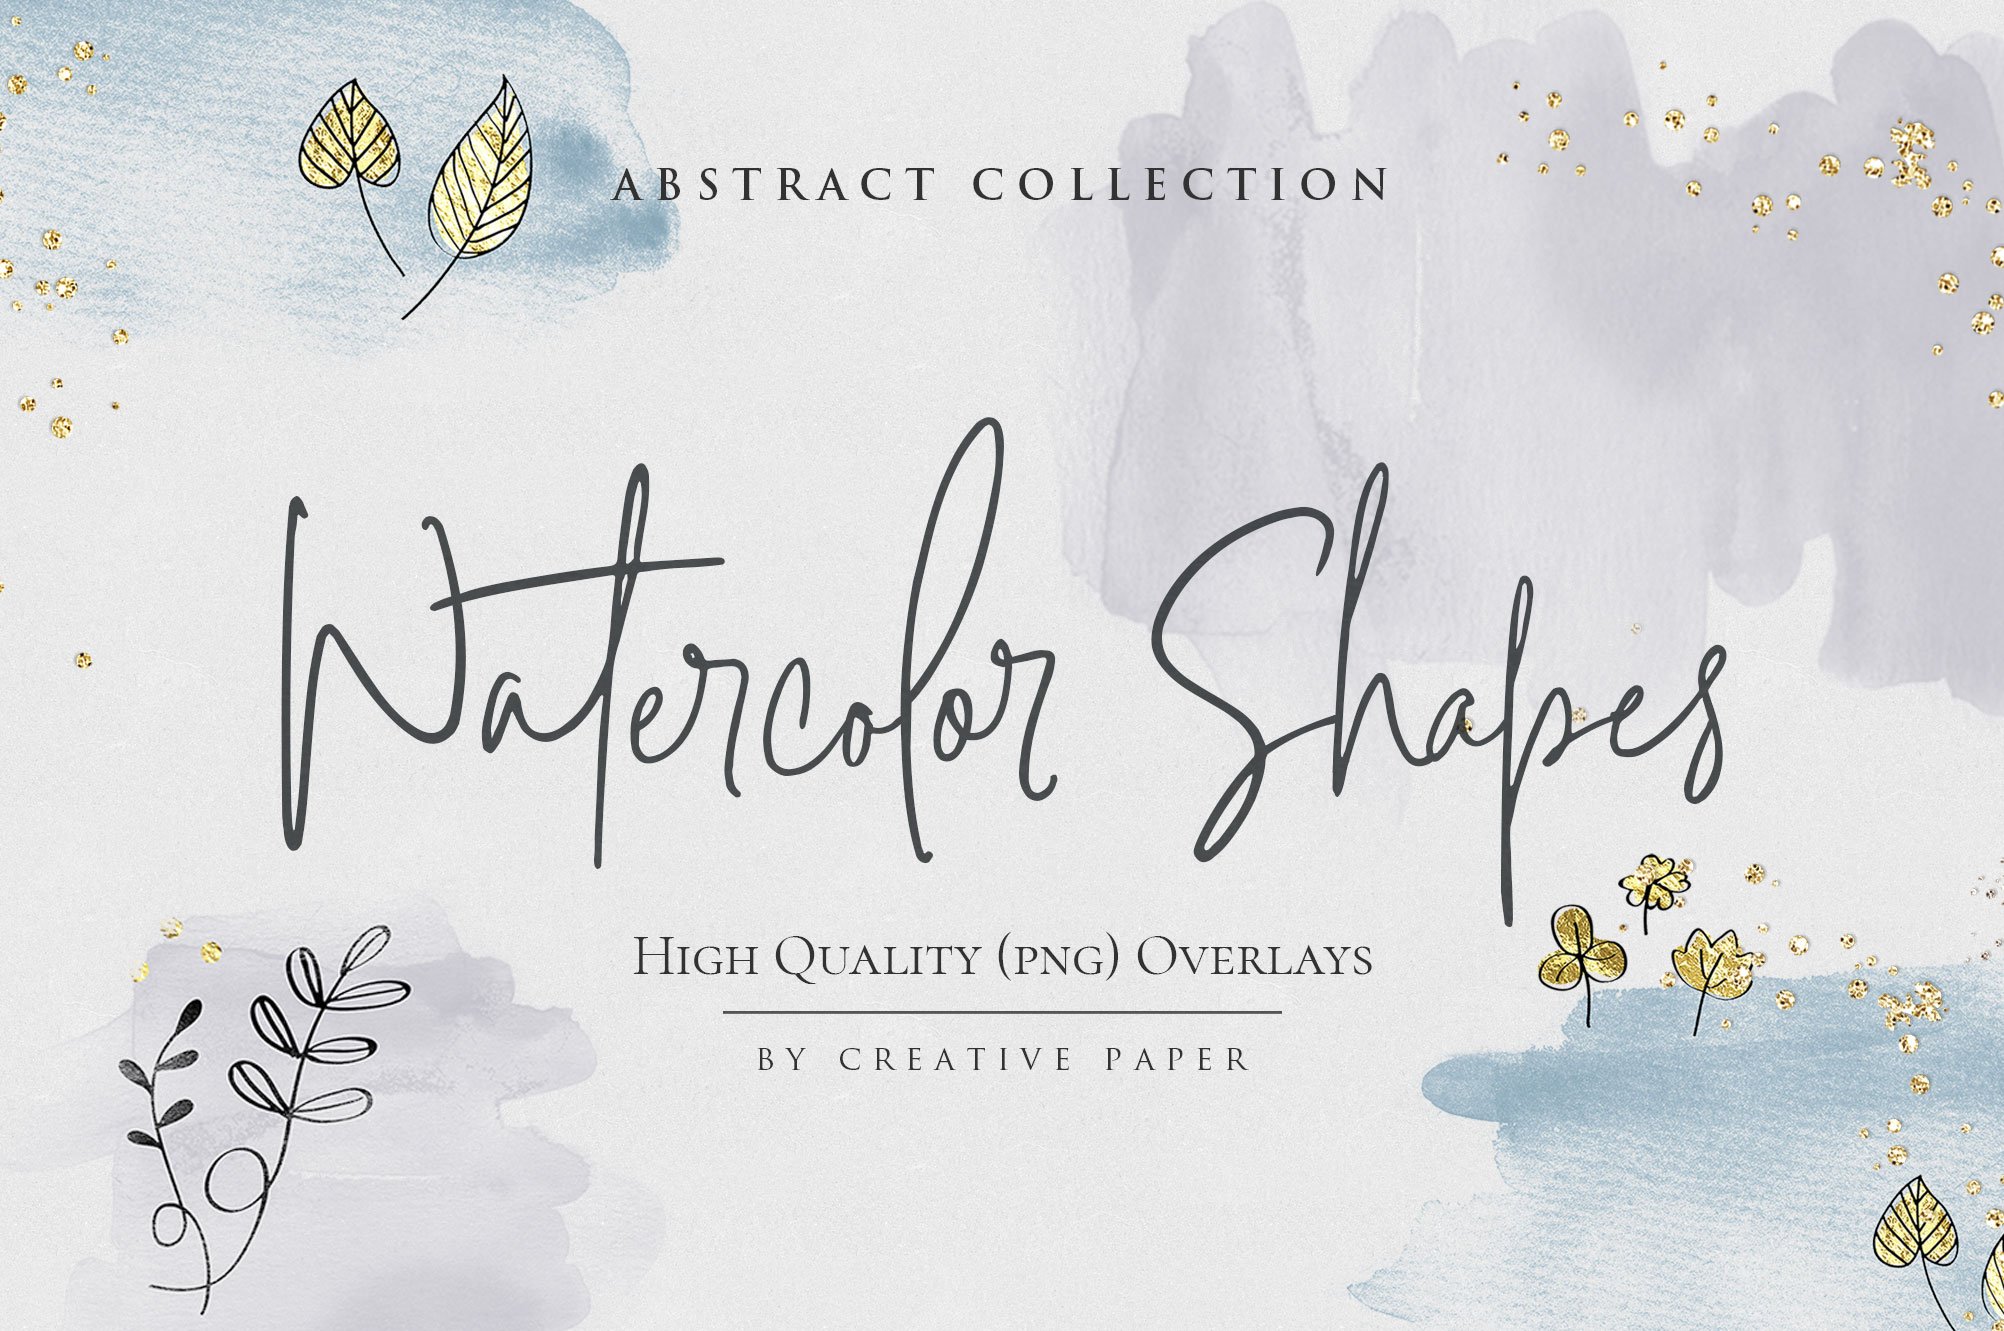 Watercolor Shapes Botanical Overlays